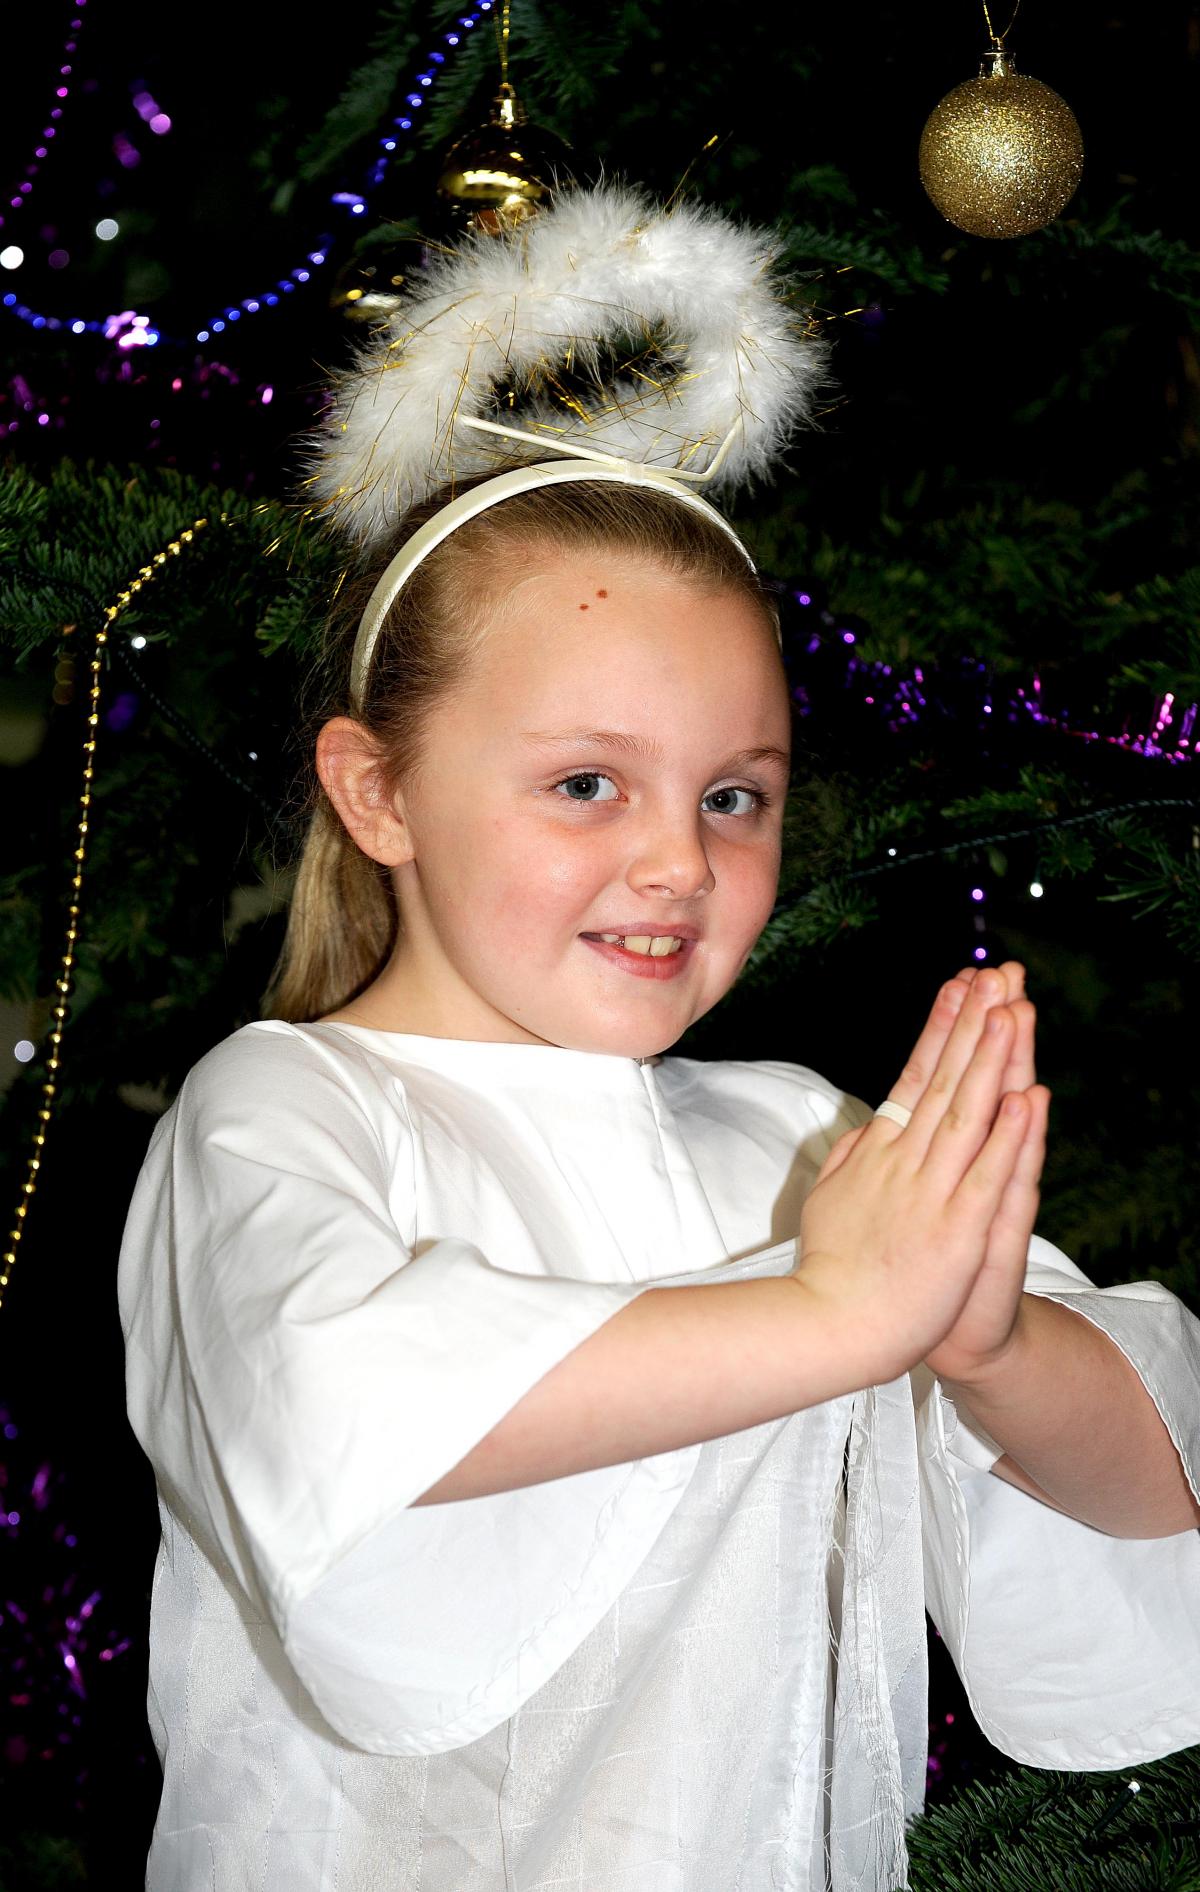 Taking part in Thorpe Primary School Nativity 'Whoops-a-Daisy Angel' was, Shorna Hall